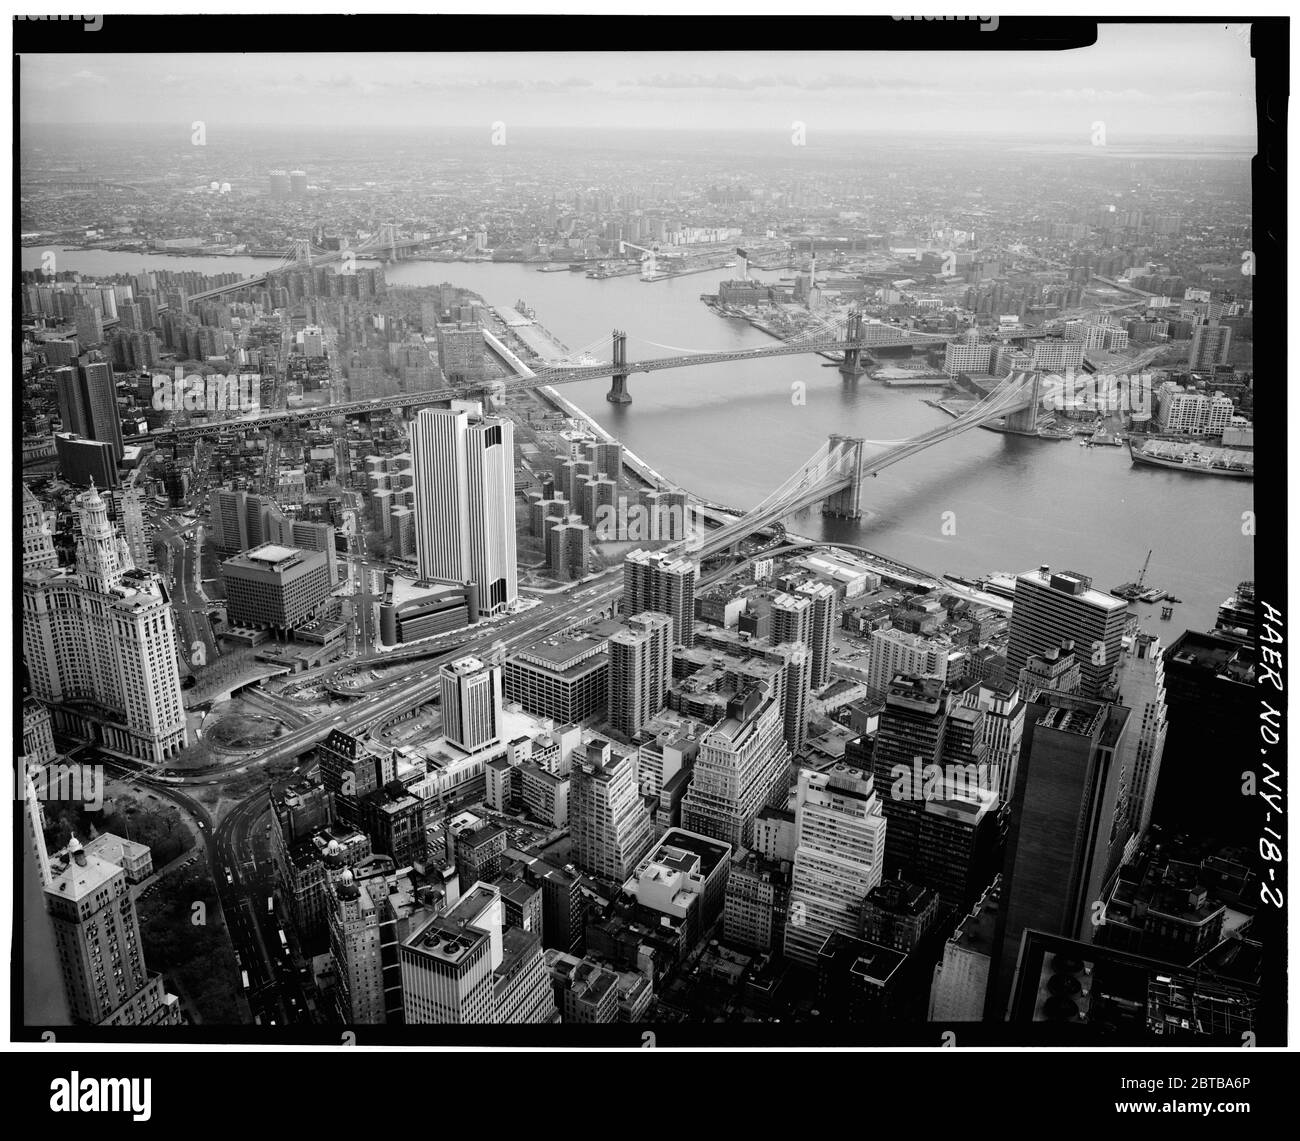 1982, NEW YORK , USA :  View looking  from top of World Trade Tower .  Brooklyn Bridge, Spanning East River between Park Row , Manhattan and Sands Street , Brooklyn , New York, New York County, NY . The great East River suspension bridge, opened the day 24 may 1883 -- Connecting the cities of New York and Brooklyn  . Photo by Jet Lowe  ( images made by the U.S. Government ) - BROOKLYN BRIDGE - PONTE DI BROOKLYN - FOTO STORICHE - HISTORY - GEOGRAFIA - GEOGRAPHY  -  landscape - paesaggio - veduta - panorama - fiume Hudson river  - landscape  - TORRI GEMELLE - TWIN TOWERS  ---- Archivio GBB Stock Photo